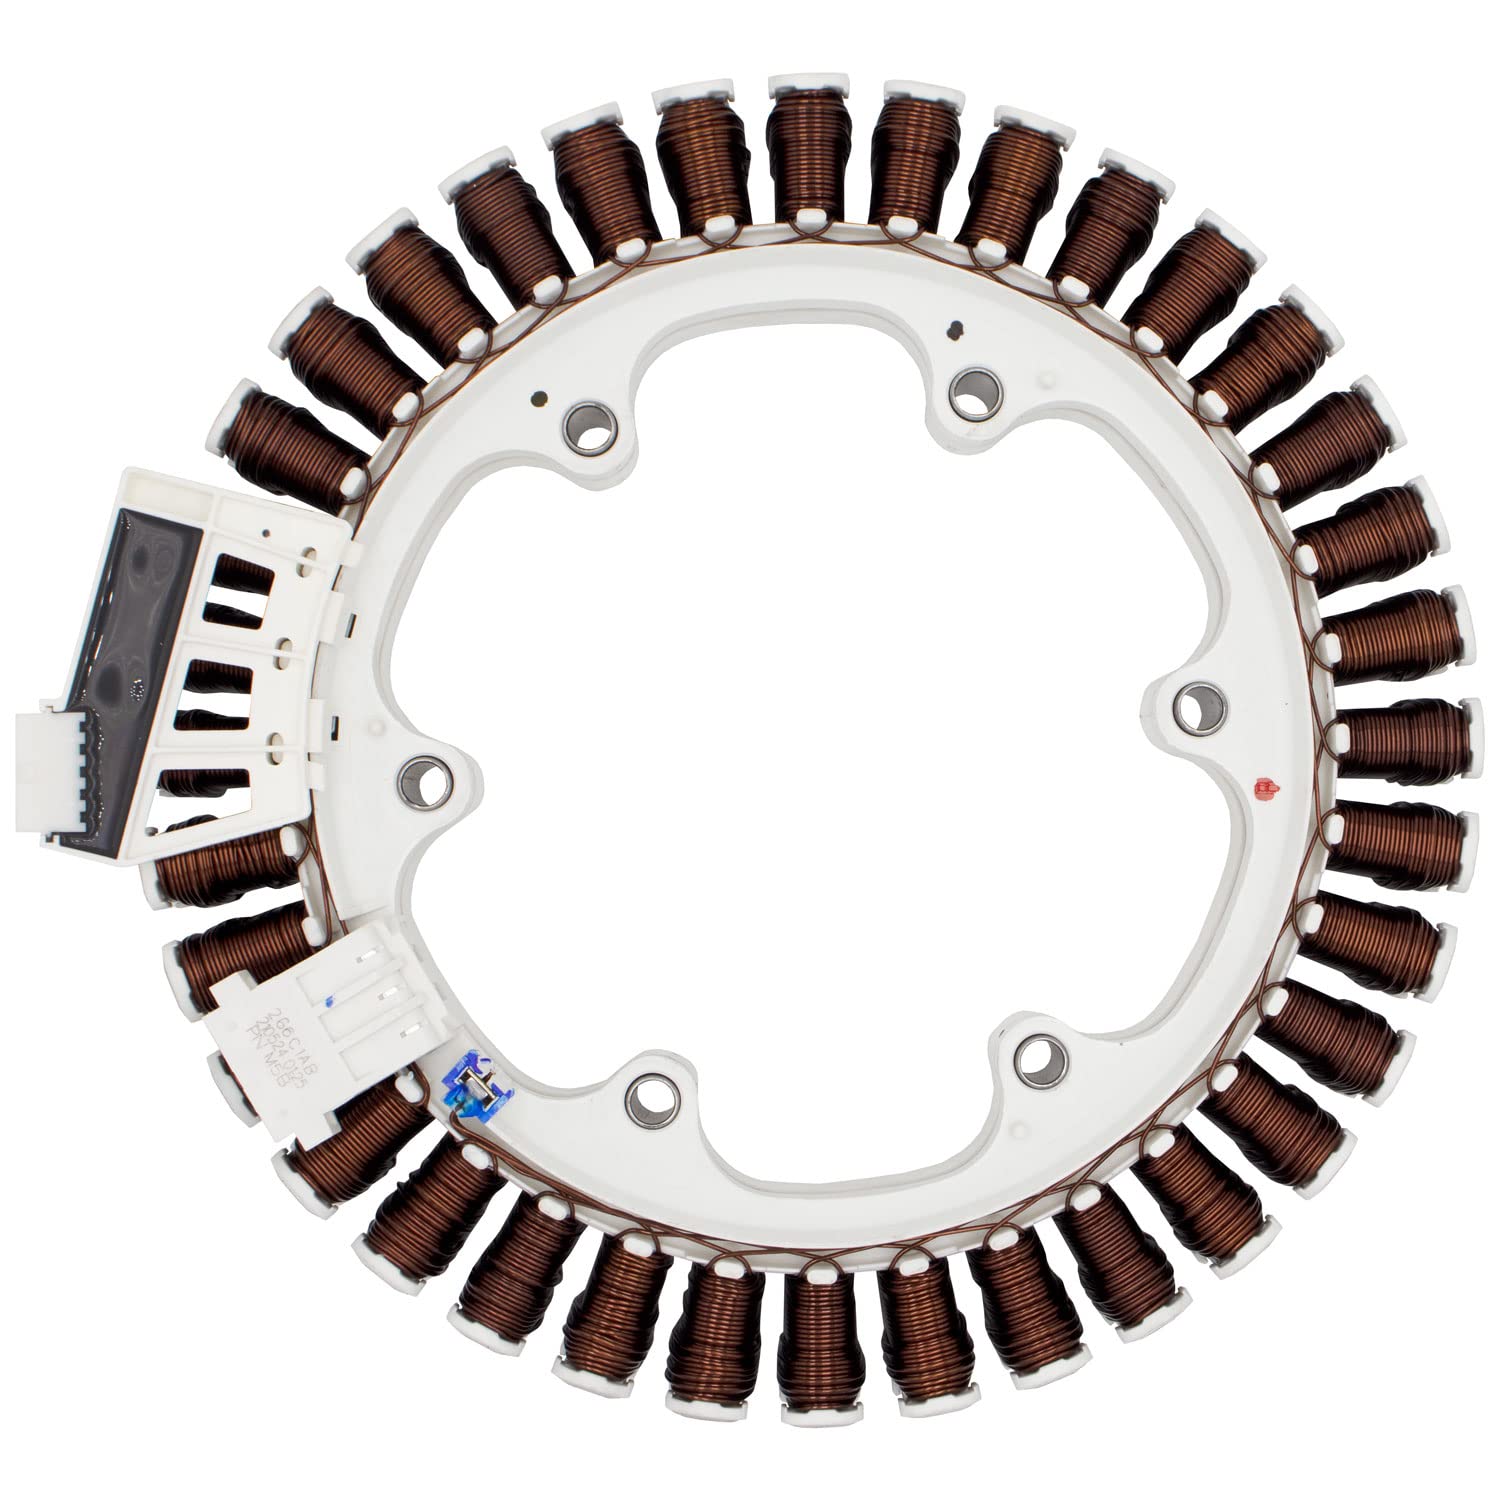 Supplying Demand 4417EA1002Y 4417FA1994g clothes Washer Stator Assembly Replacement